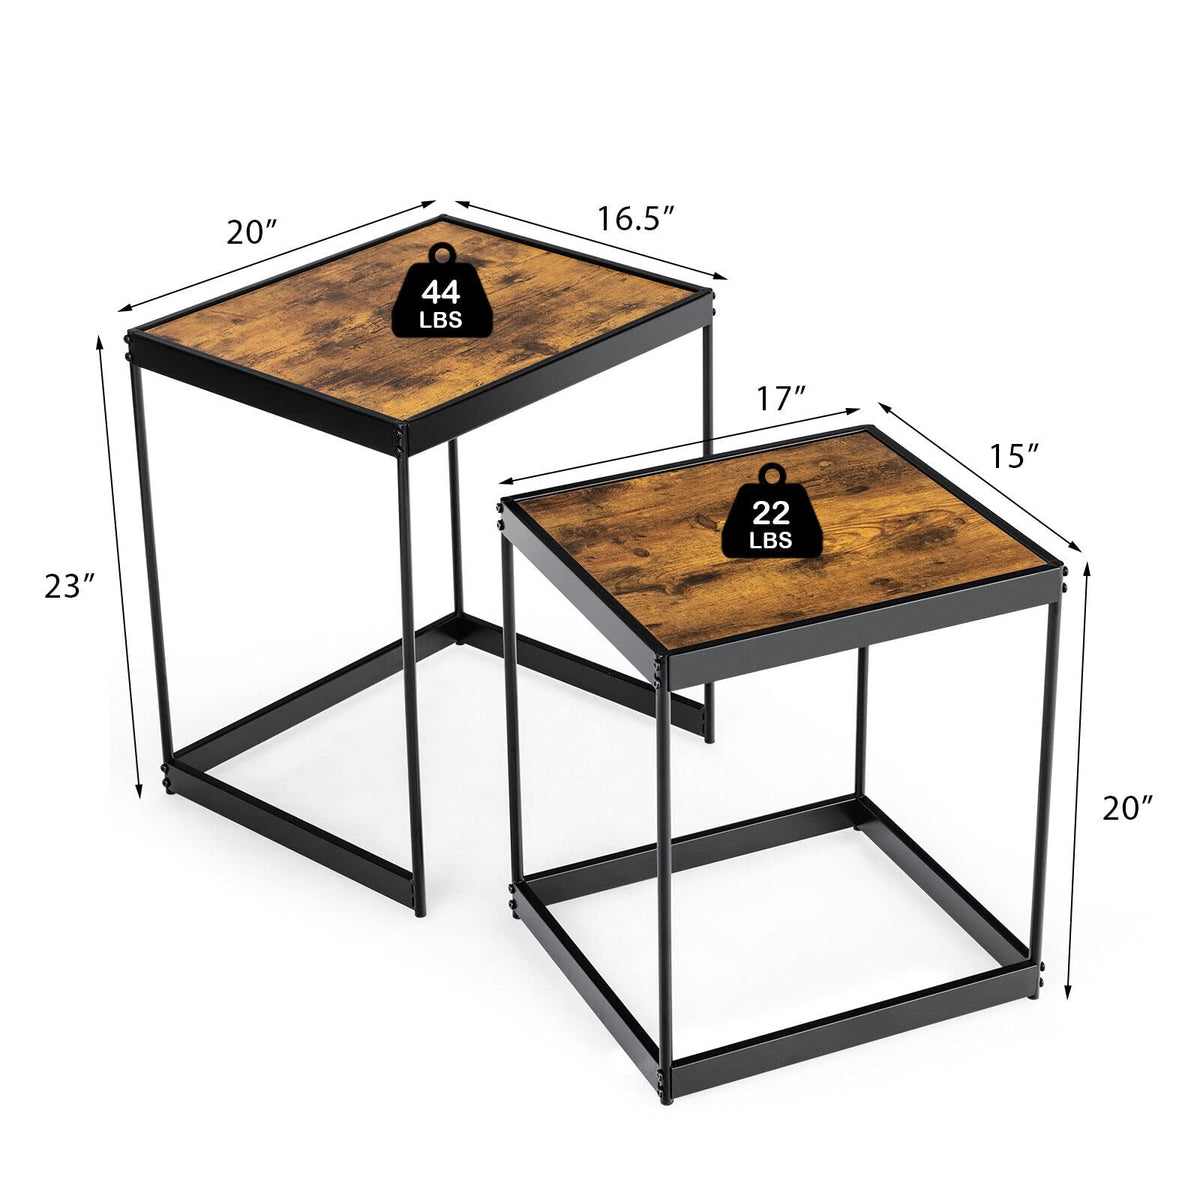 Giantex Nesting Coffee Tables, Set of 2 End Tables, Space Saving Design Side Tables